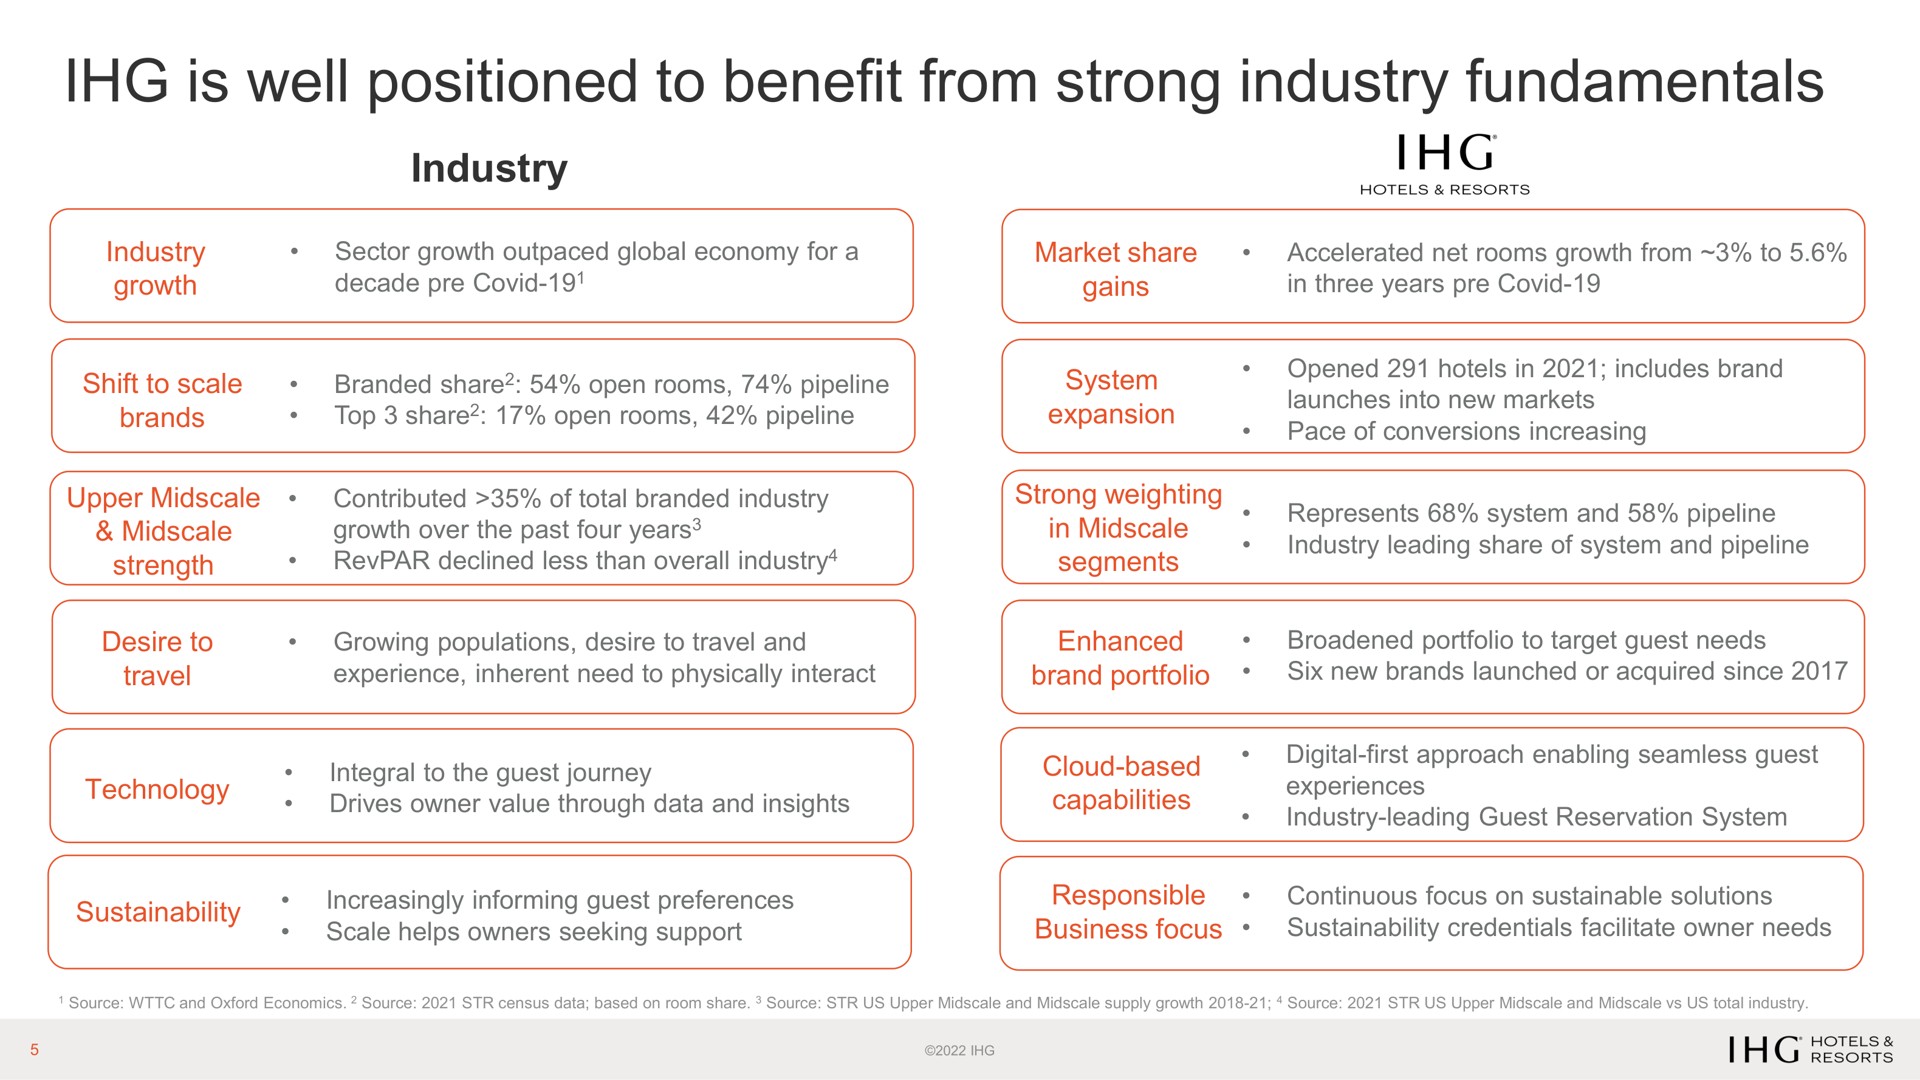 is well positioned to benefit from strong industry fundamentals | IHG Hotels